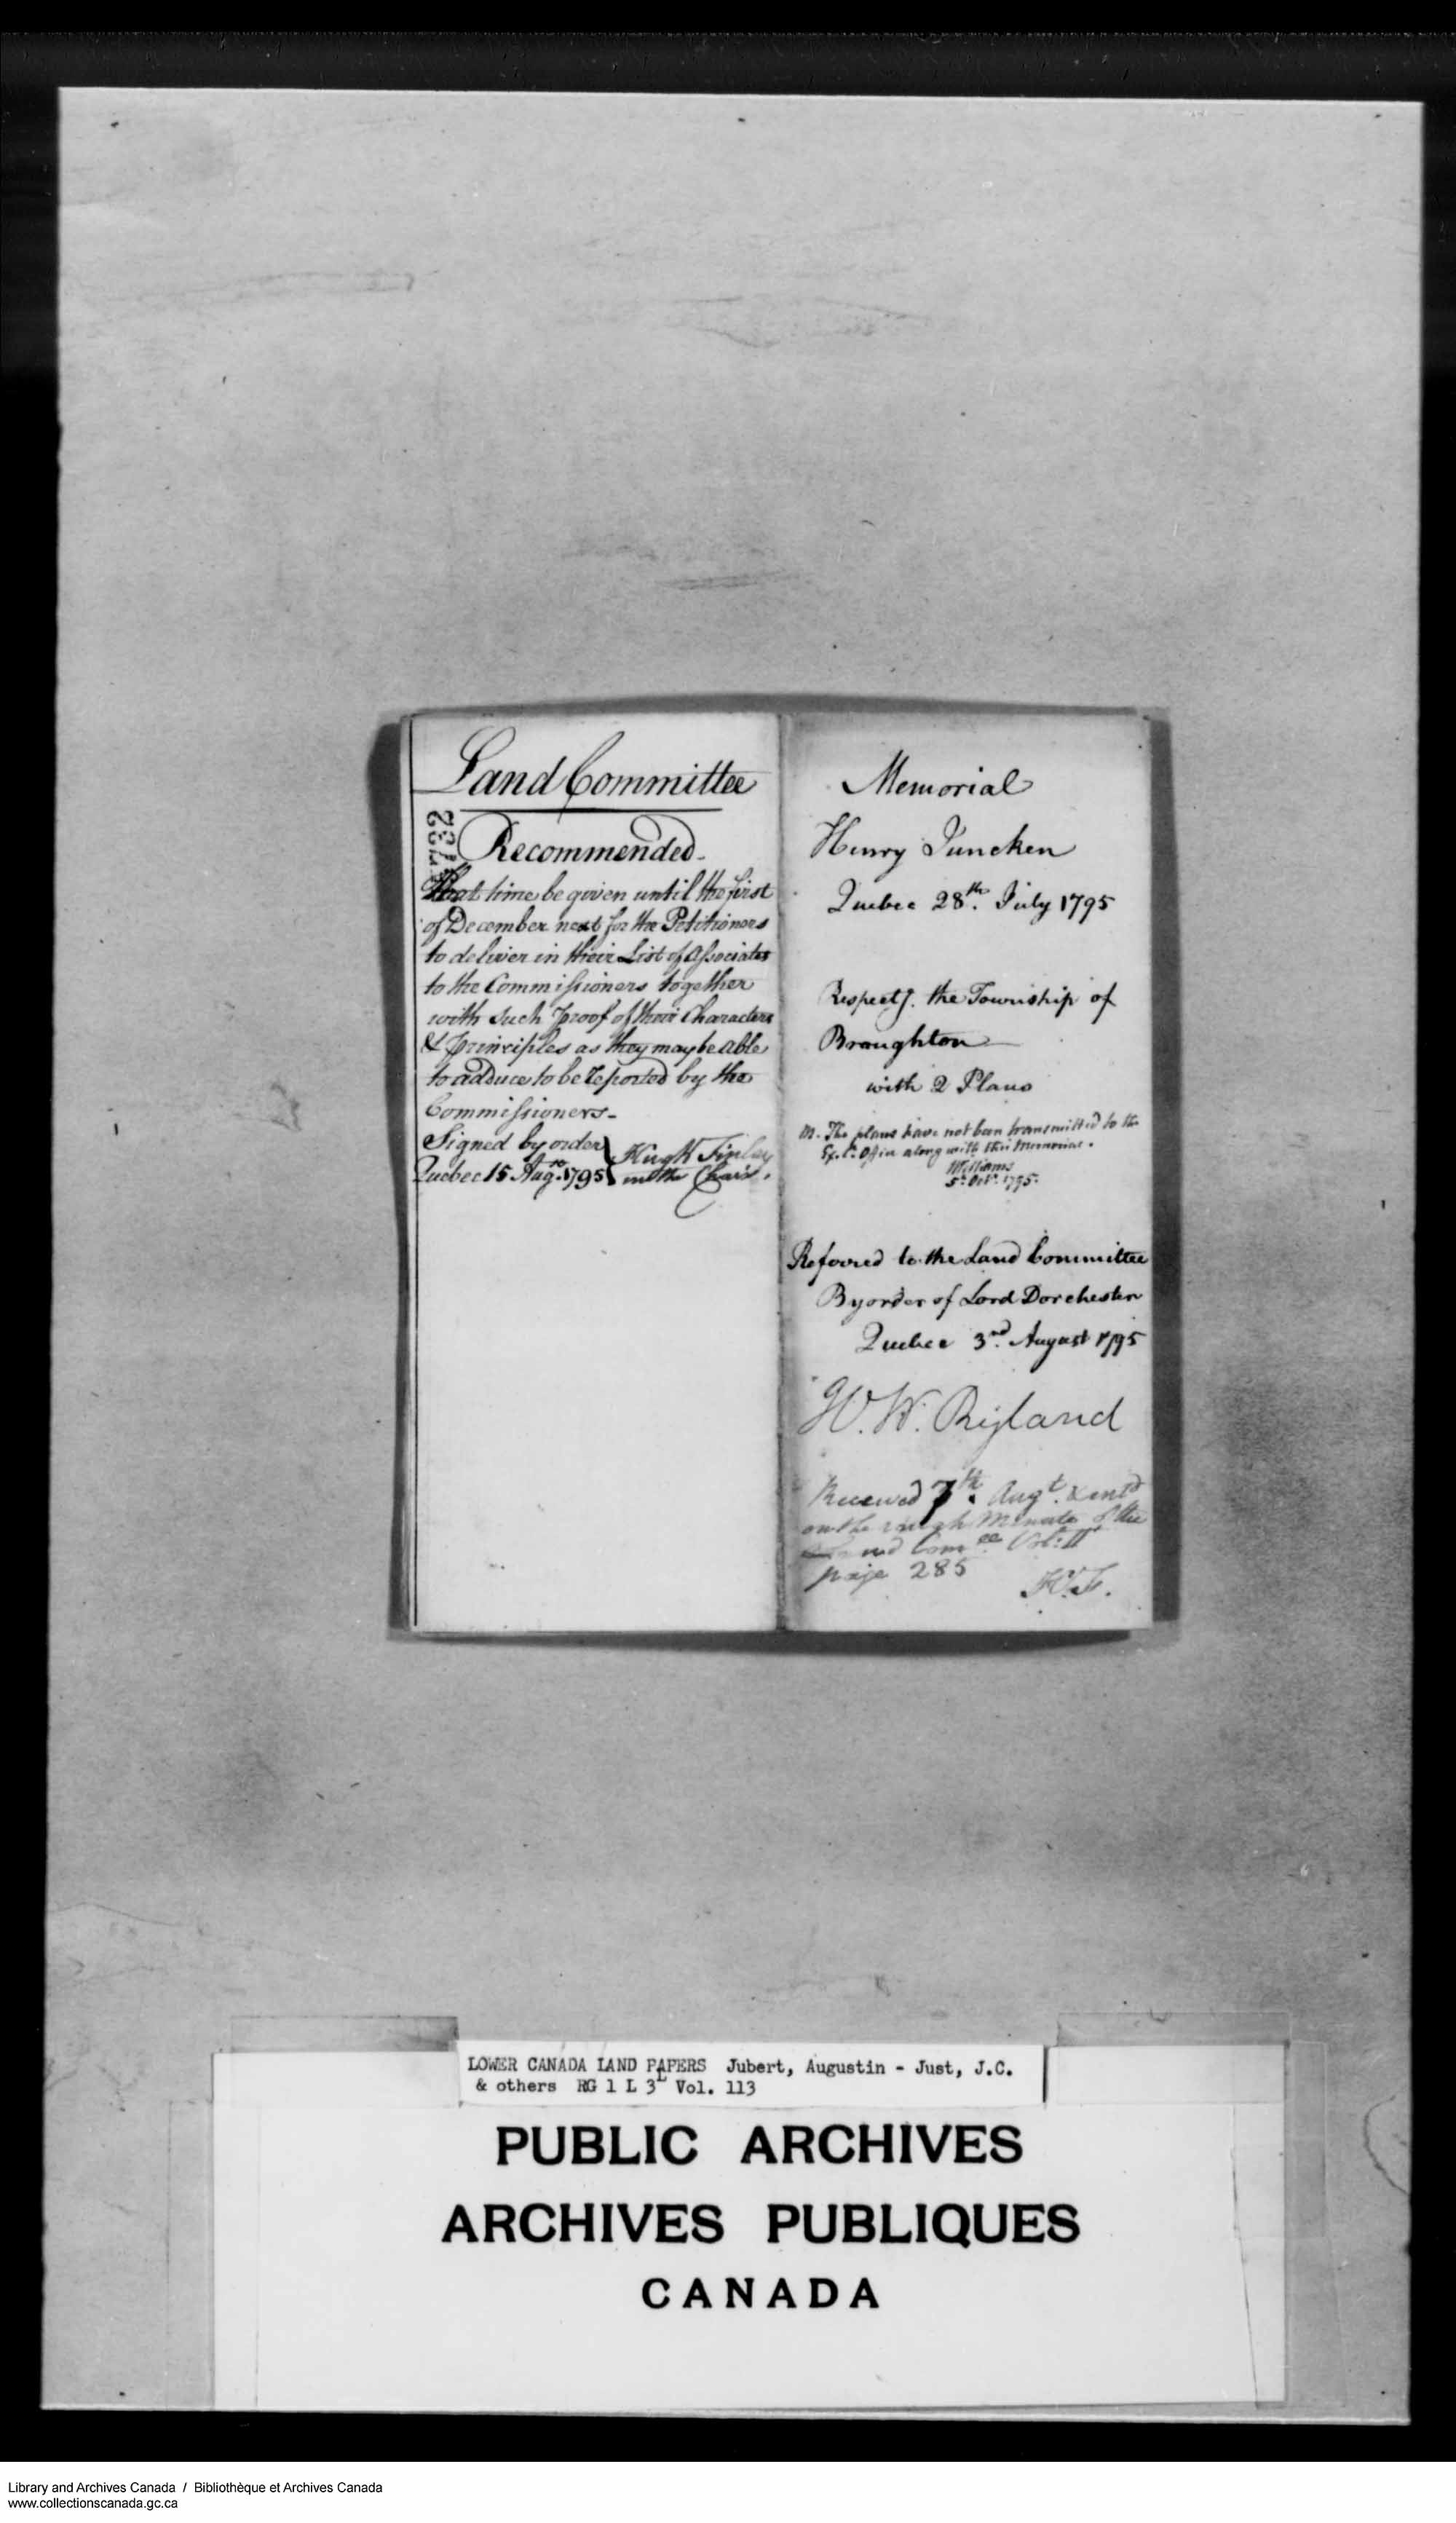 Digitized page of  for Image No.: e008700220